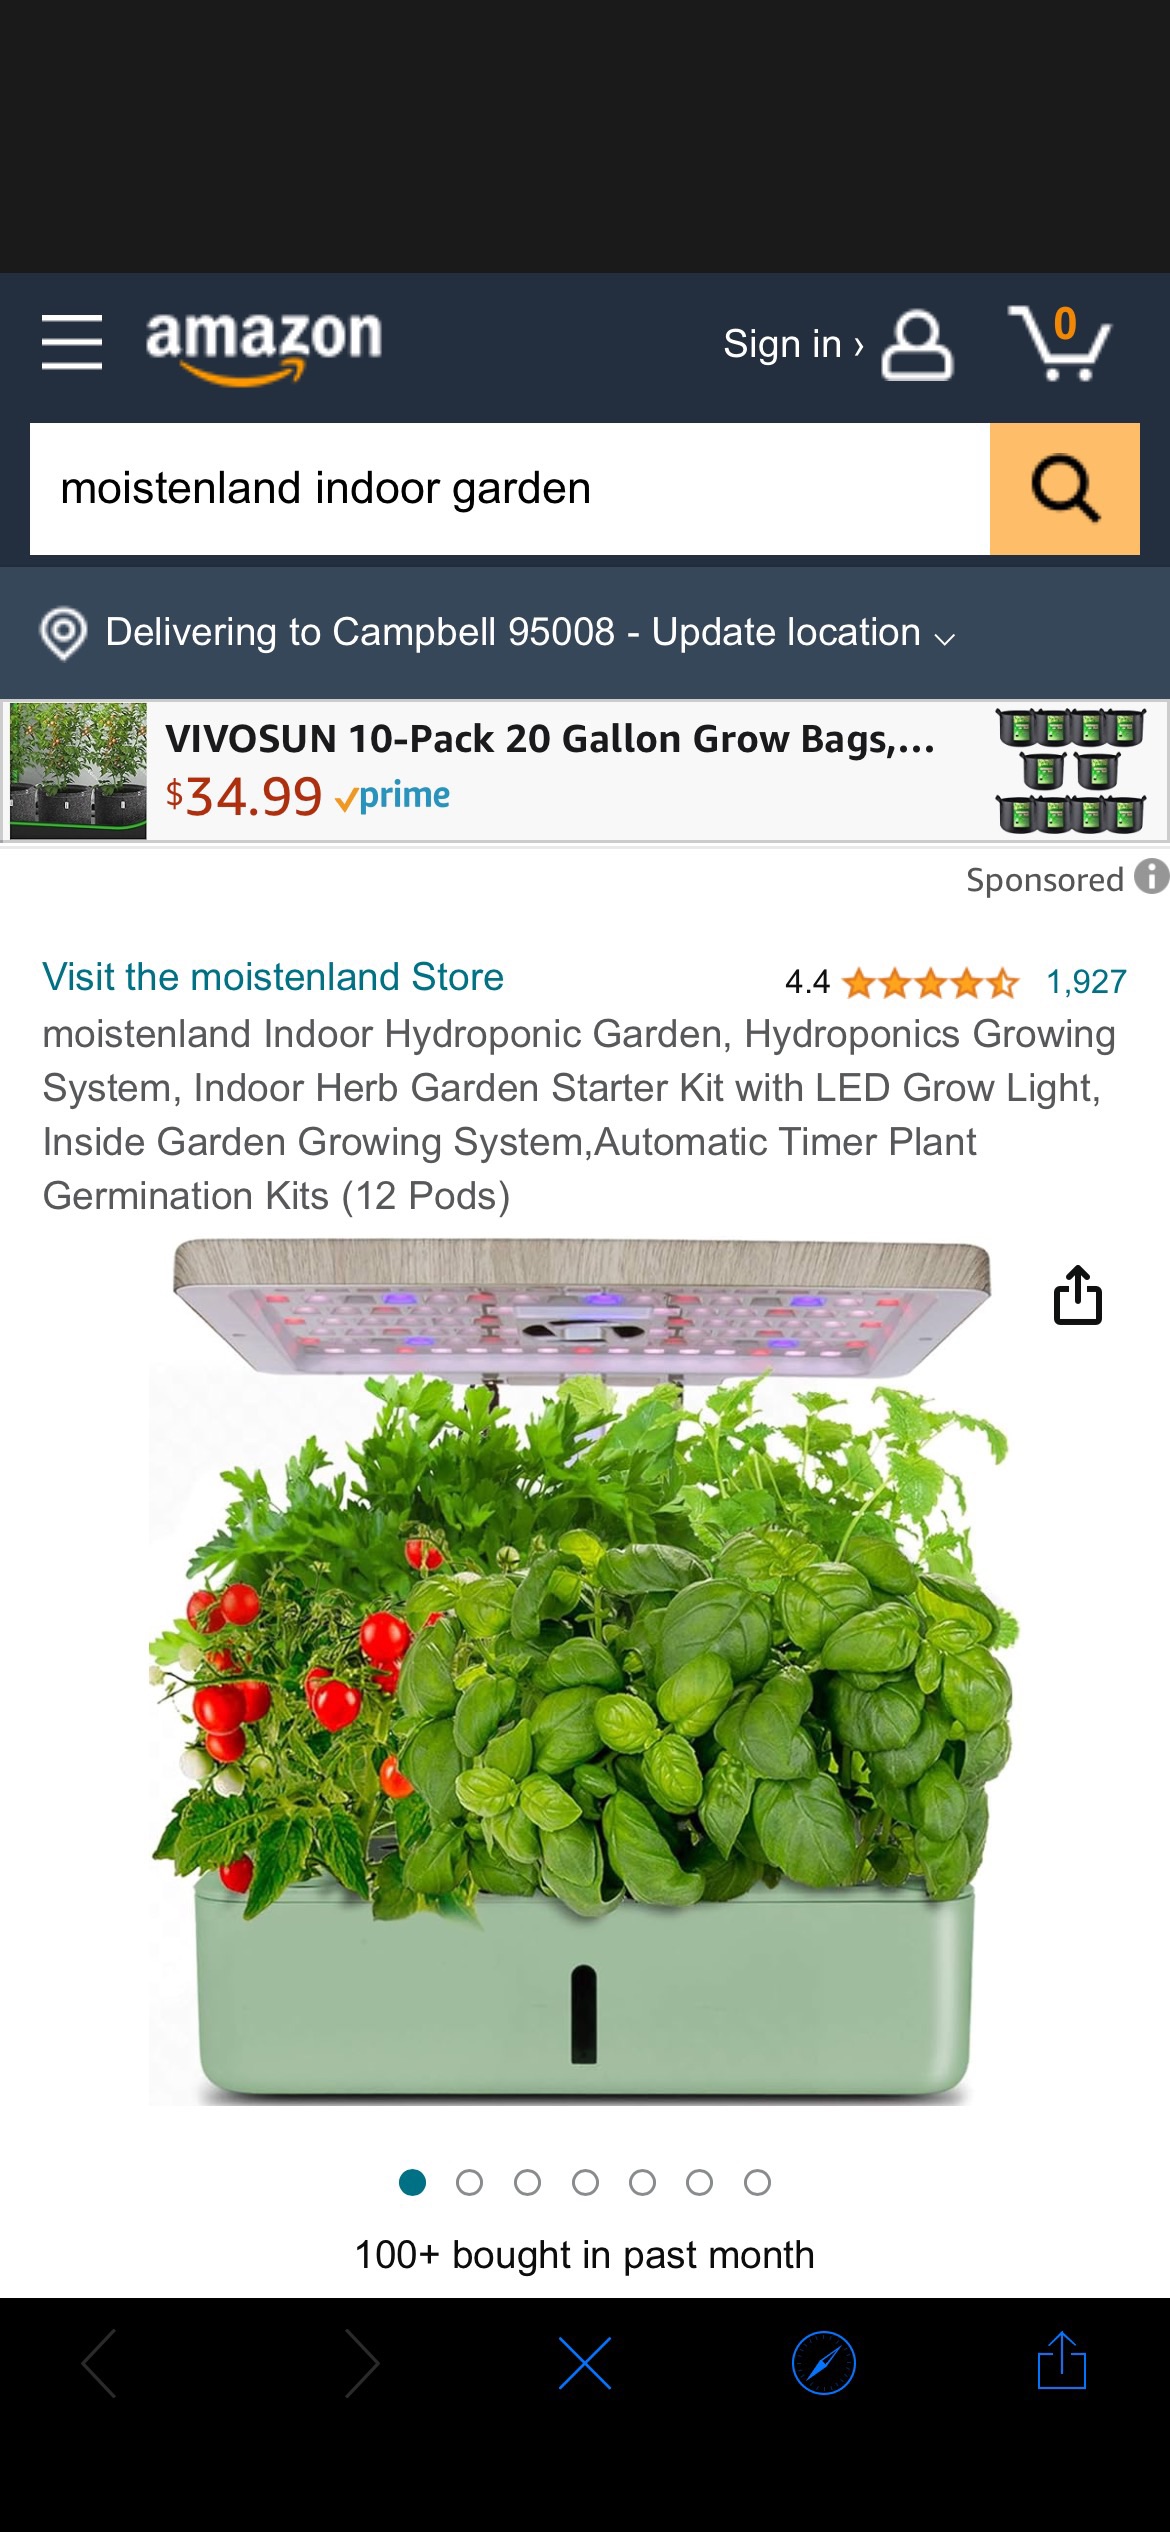 Amazon.com: moistenland Indoor Hydroponic Garden, Hydroponics Growing System, Indoor Herb Garden Starter Kit with LED Grow Light, Inside Garden Growing System,Automatic Timer Plant Germination Kits (1